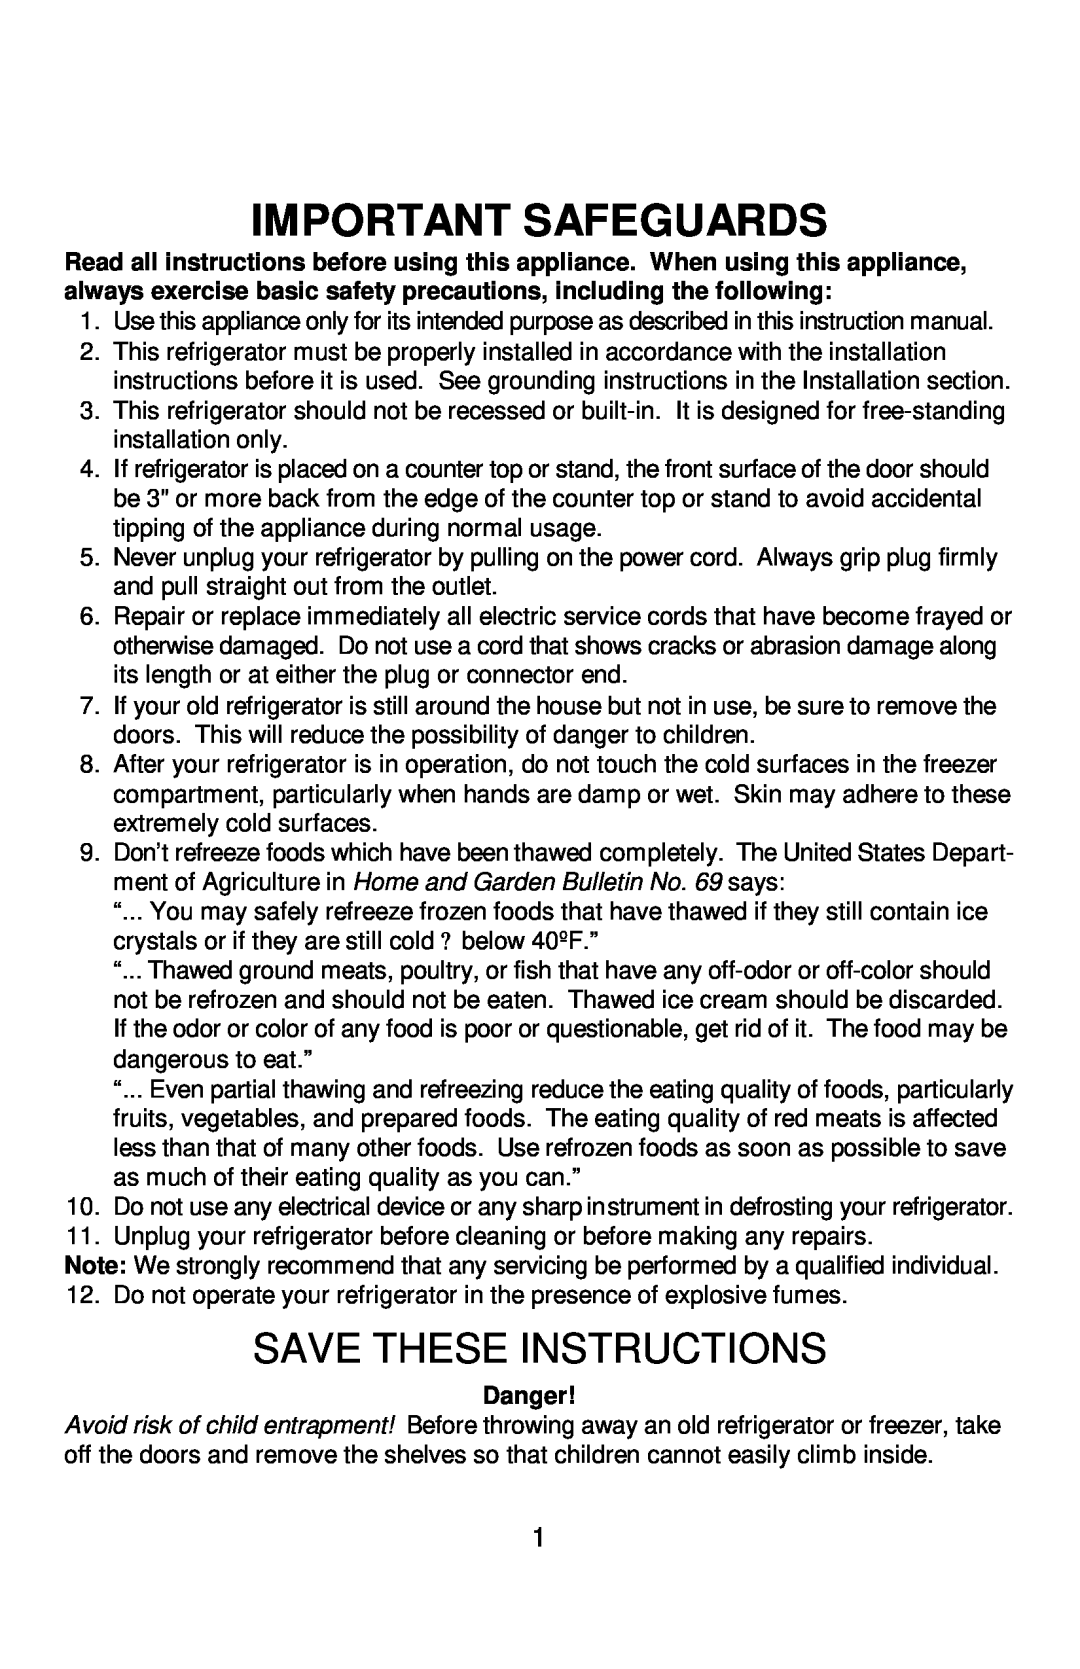 Franklin Industries, L.L.C FC-380 Series manual Important Safeguards, Save These Instructions, Danger 